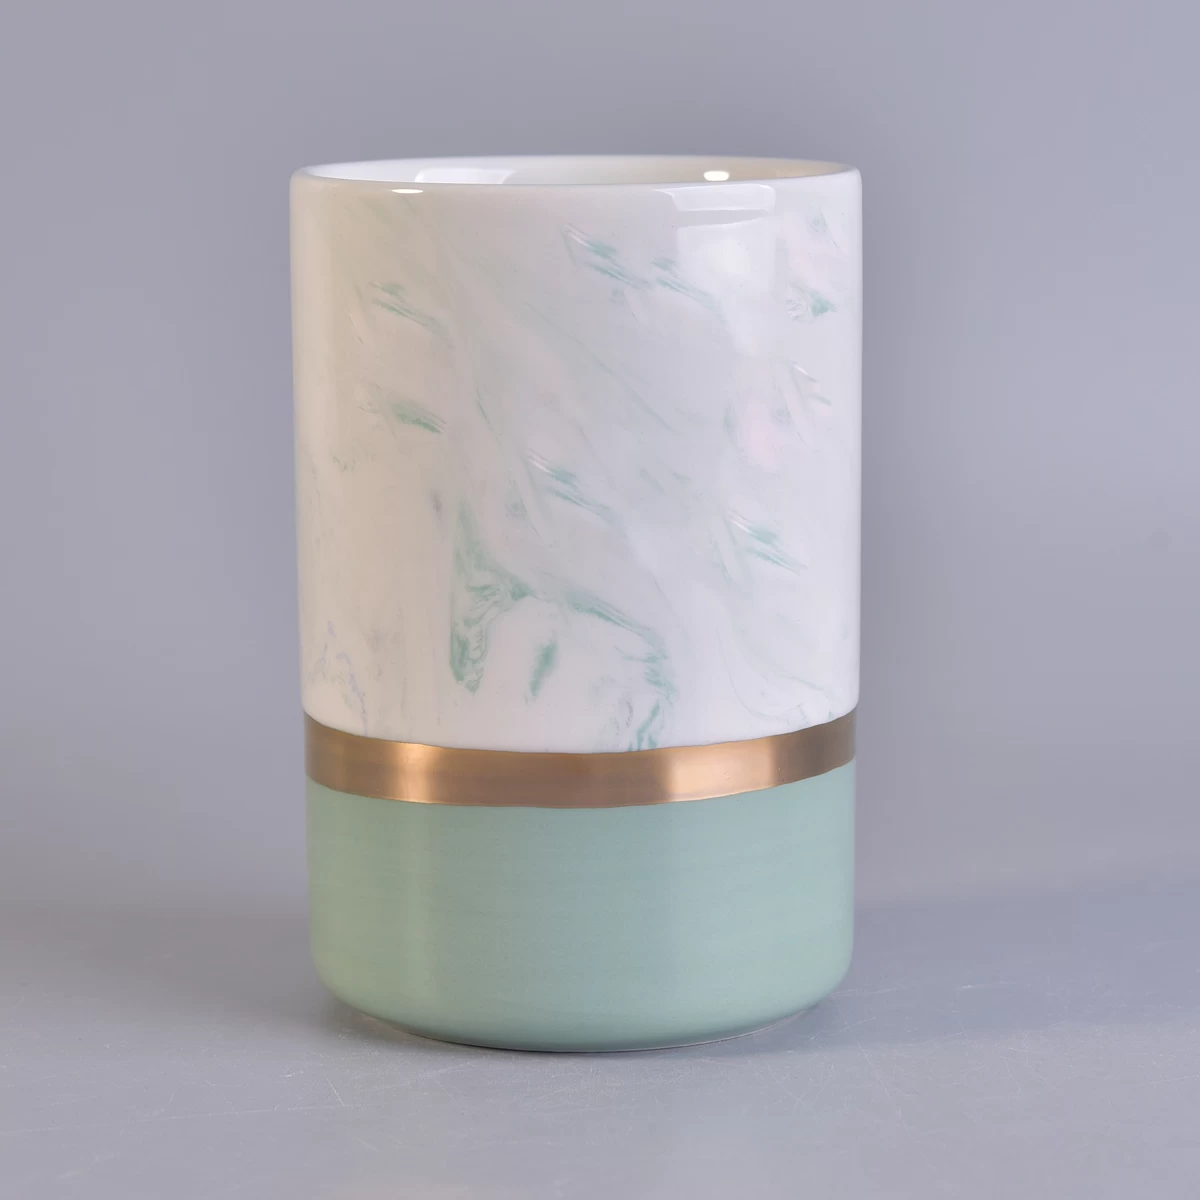 green and white ceramic candle holder, beautiful marble candle container with gold decal